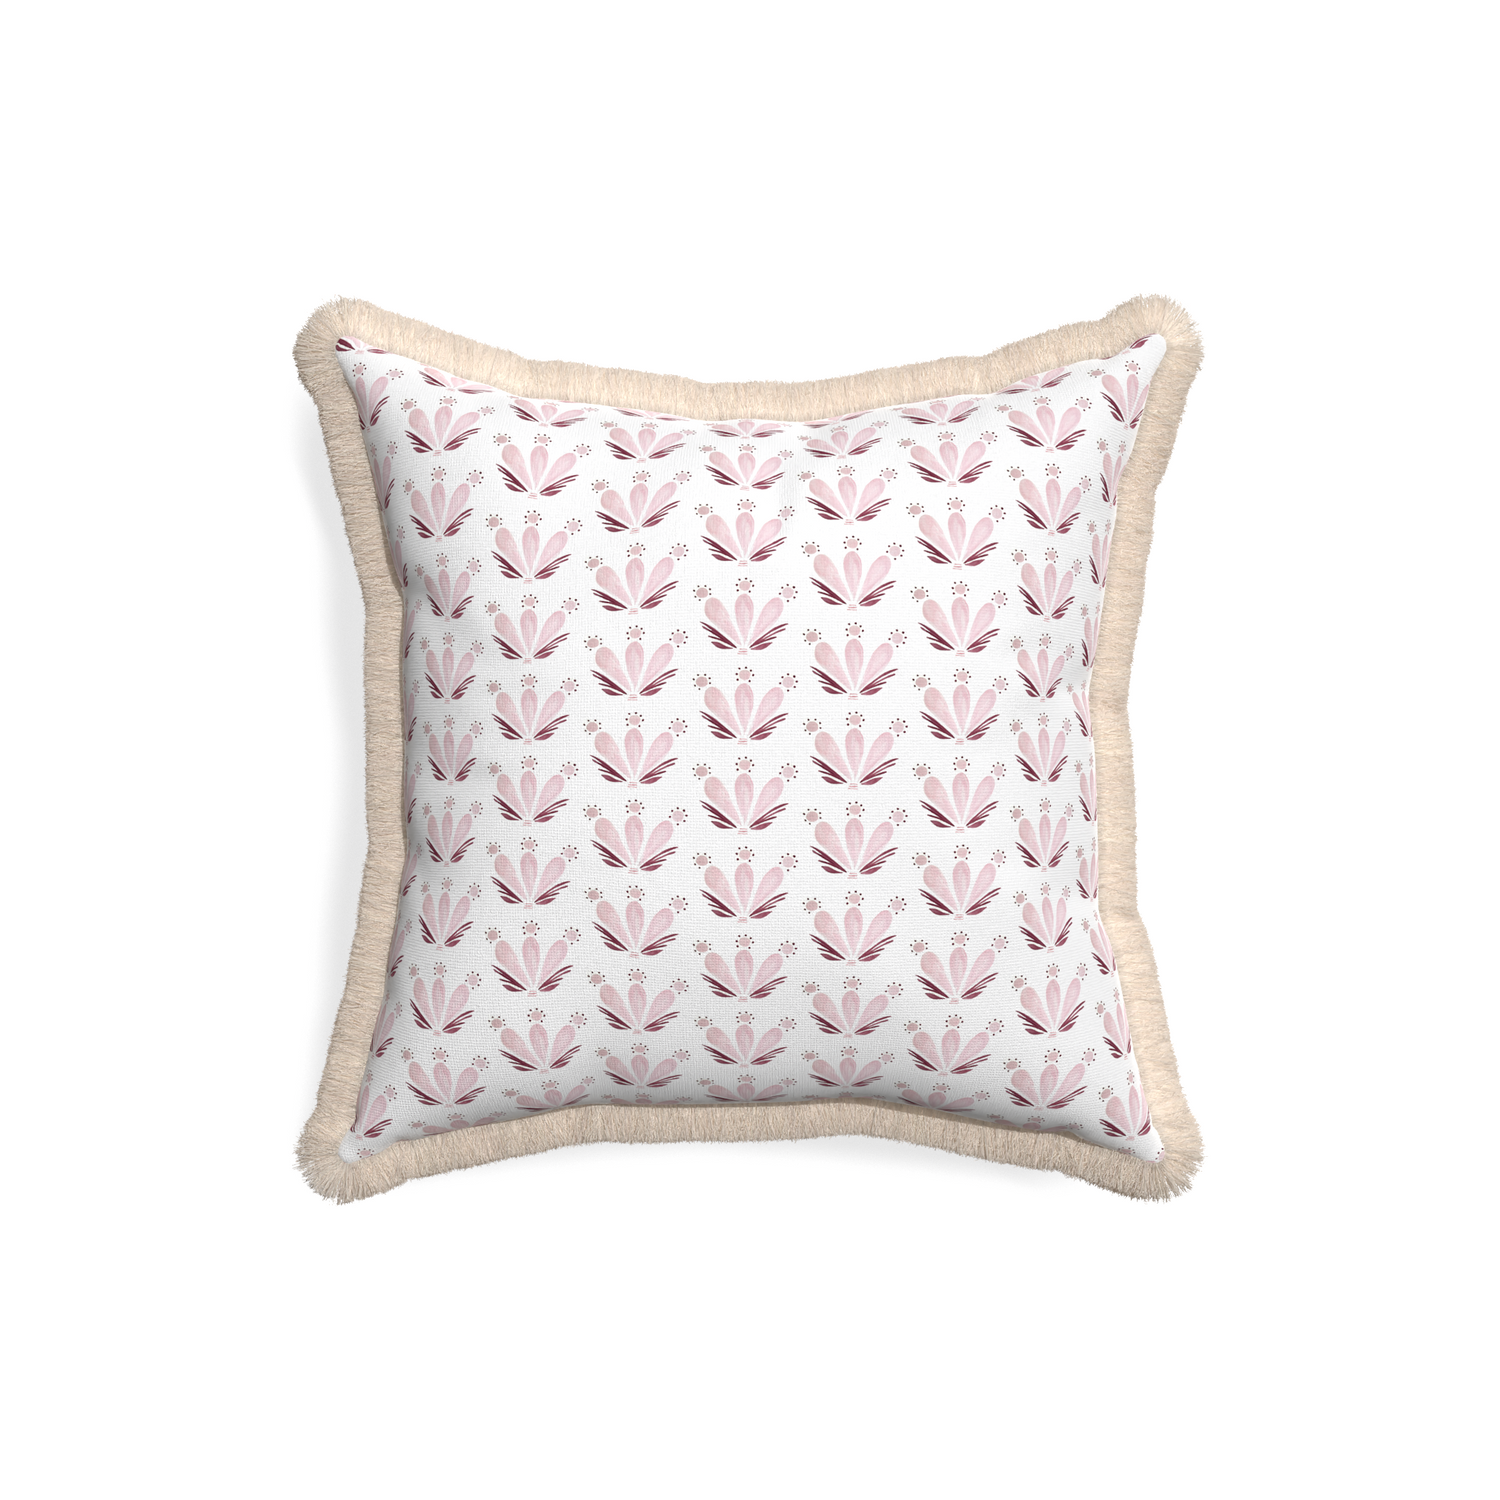 18-square serena pink custom pillow with cream fringe on white background